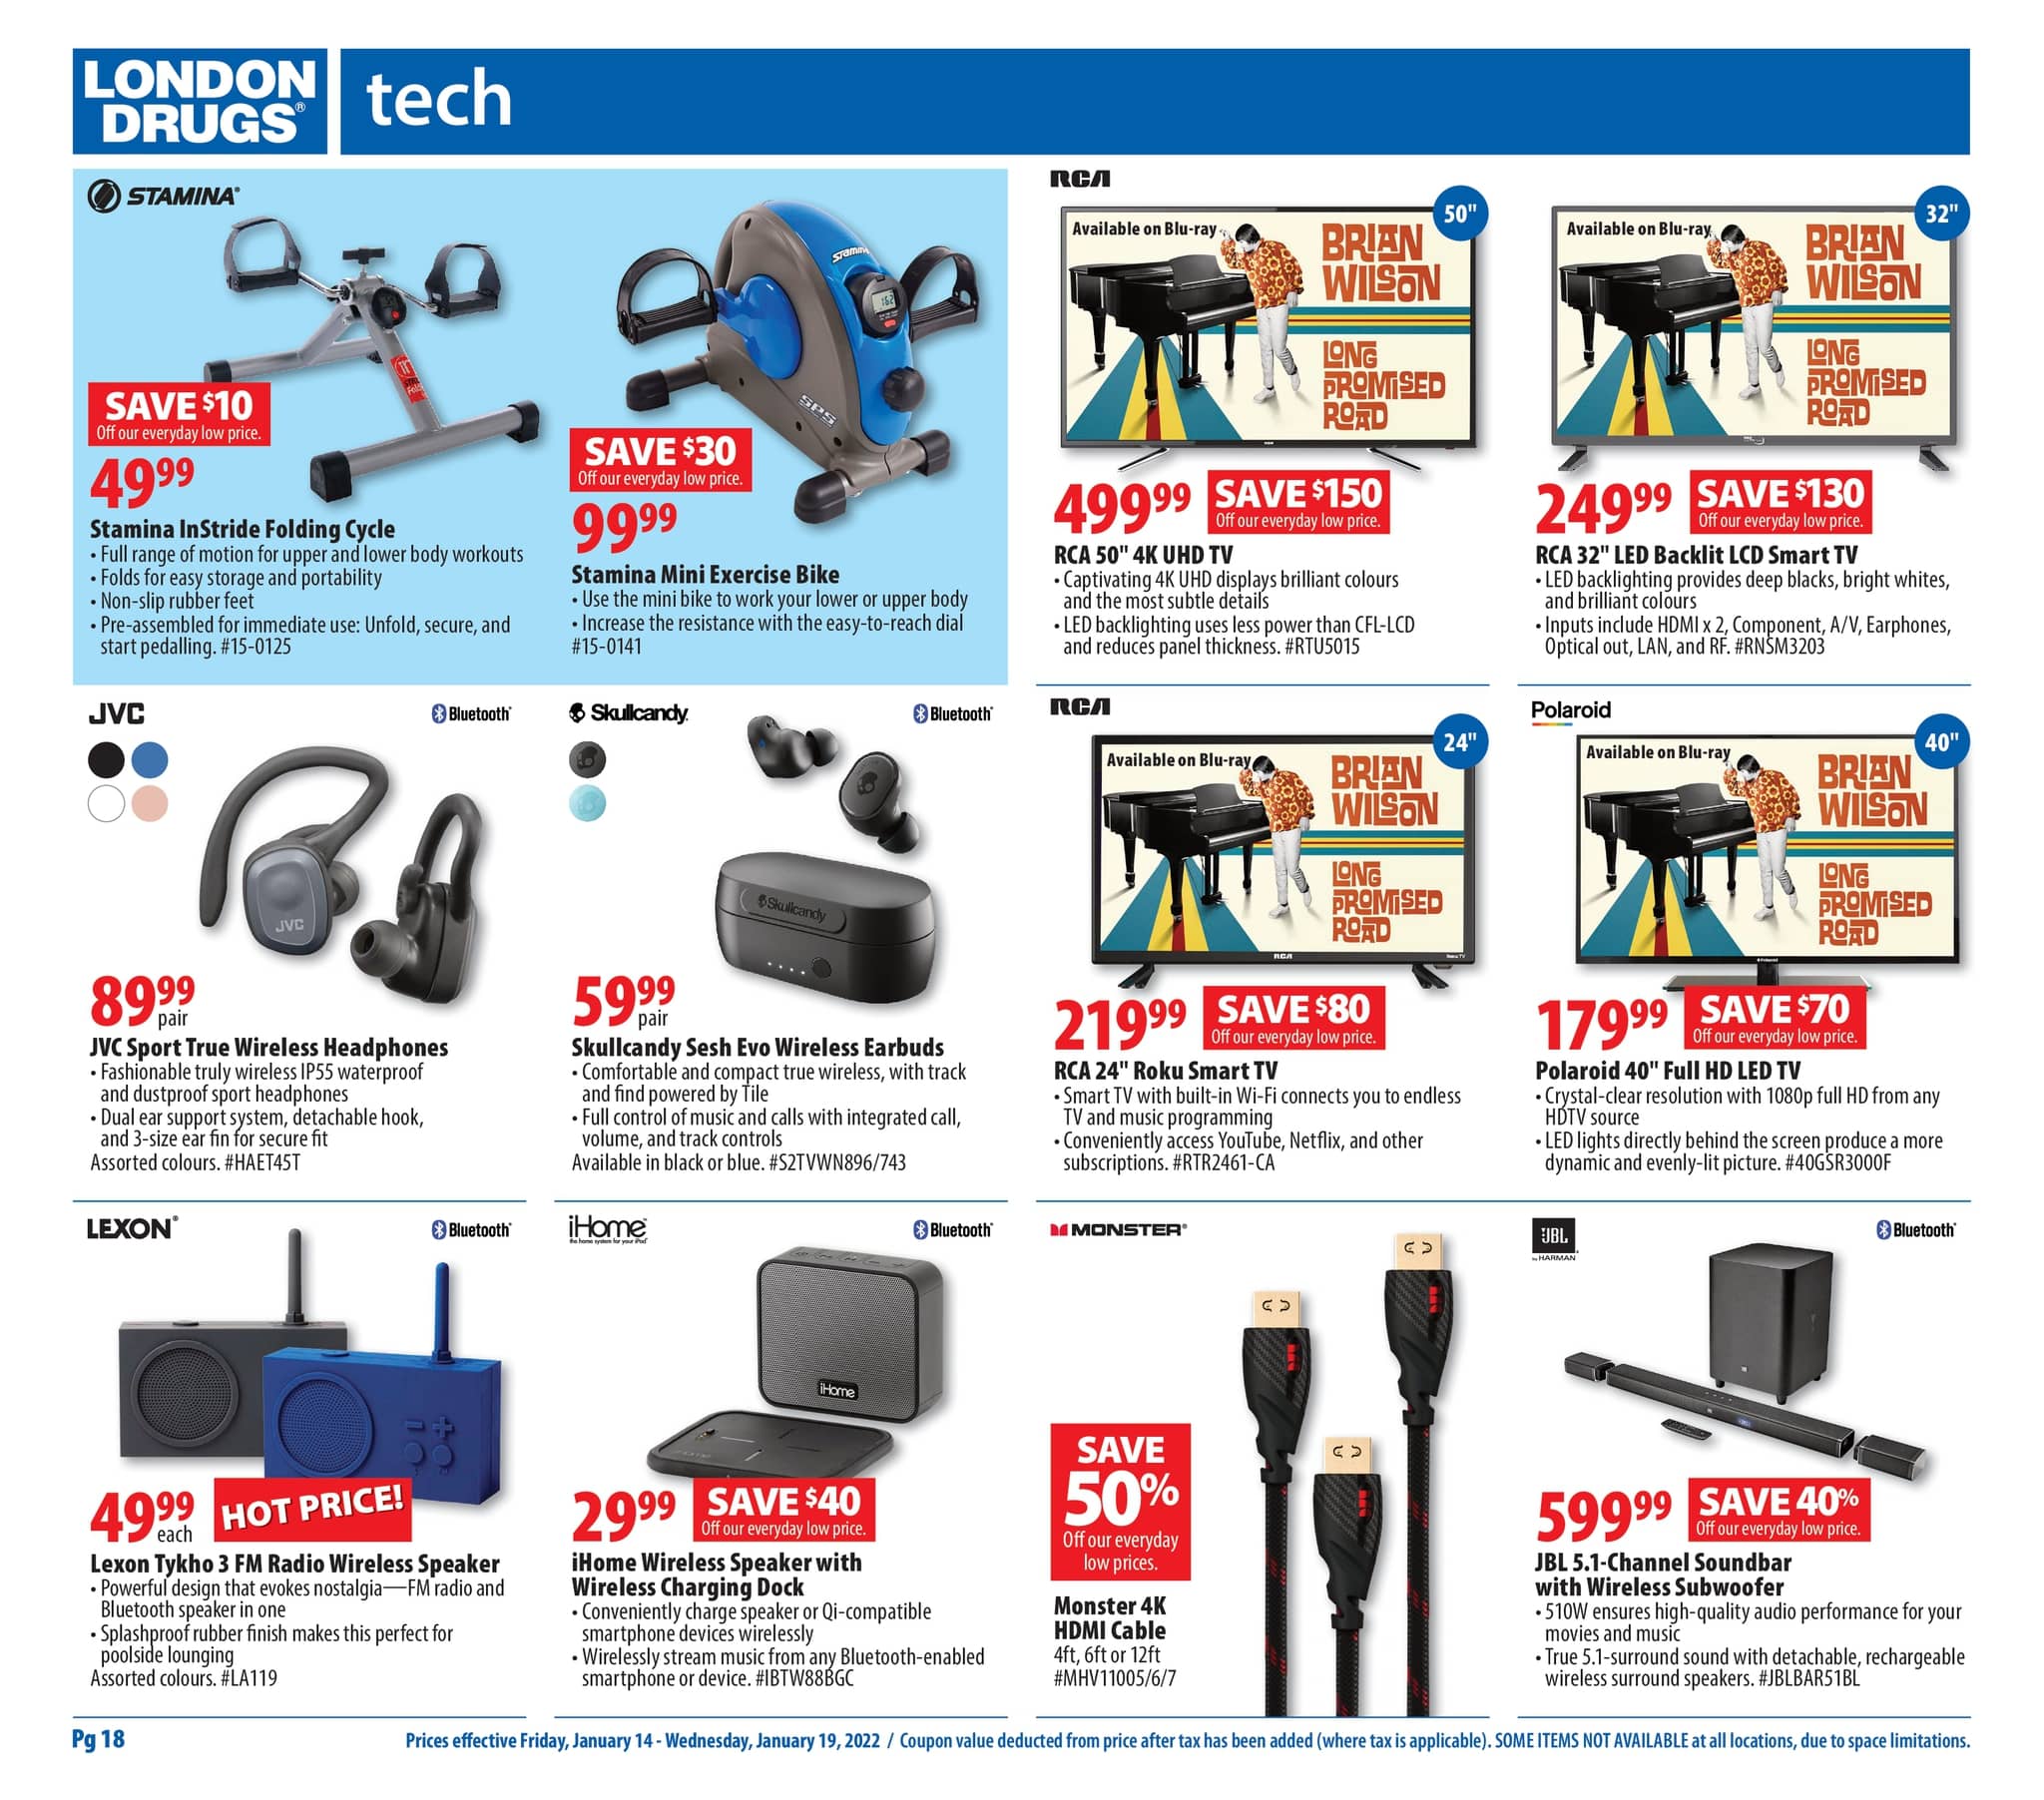 London Drugs - Weekly Flyer Specials - Page 18